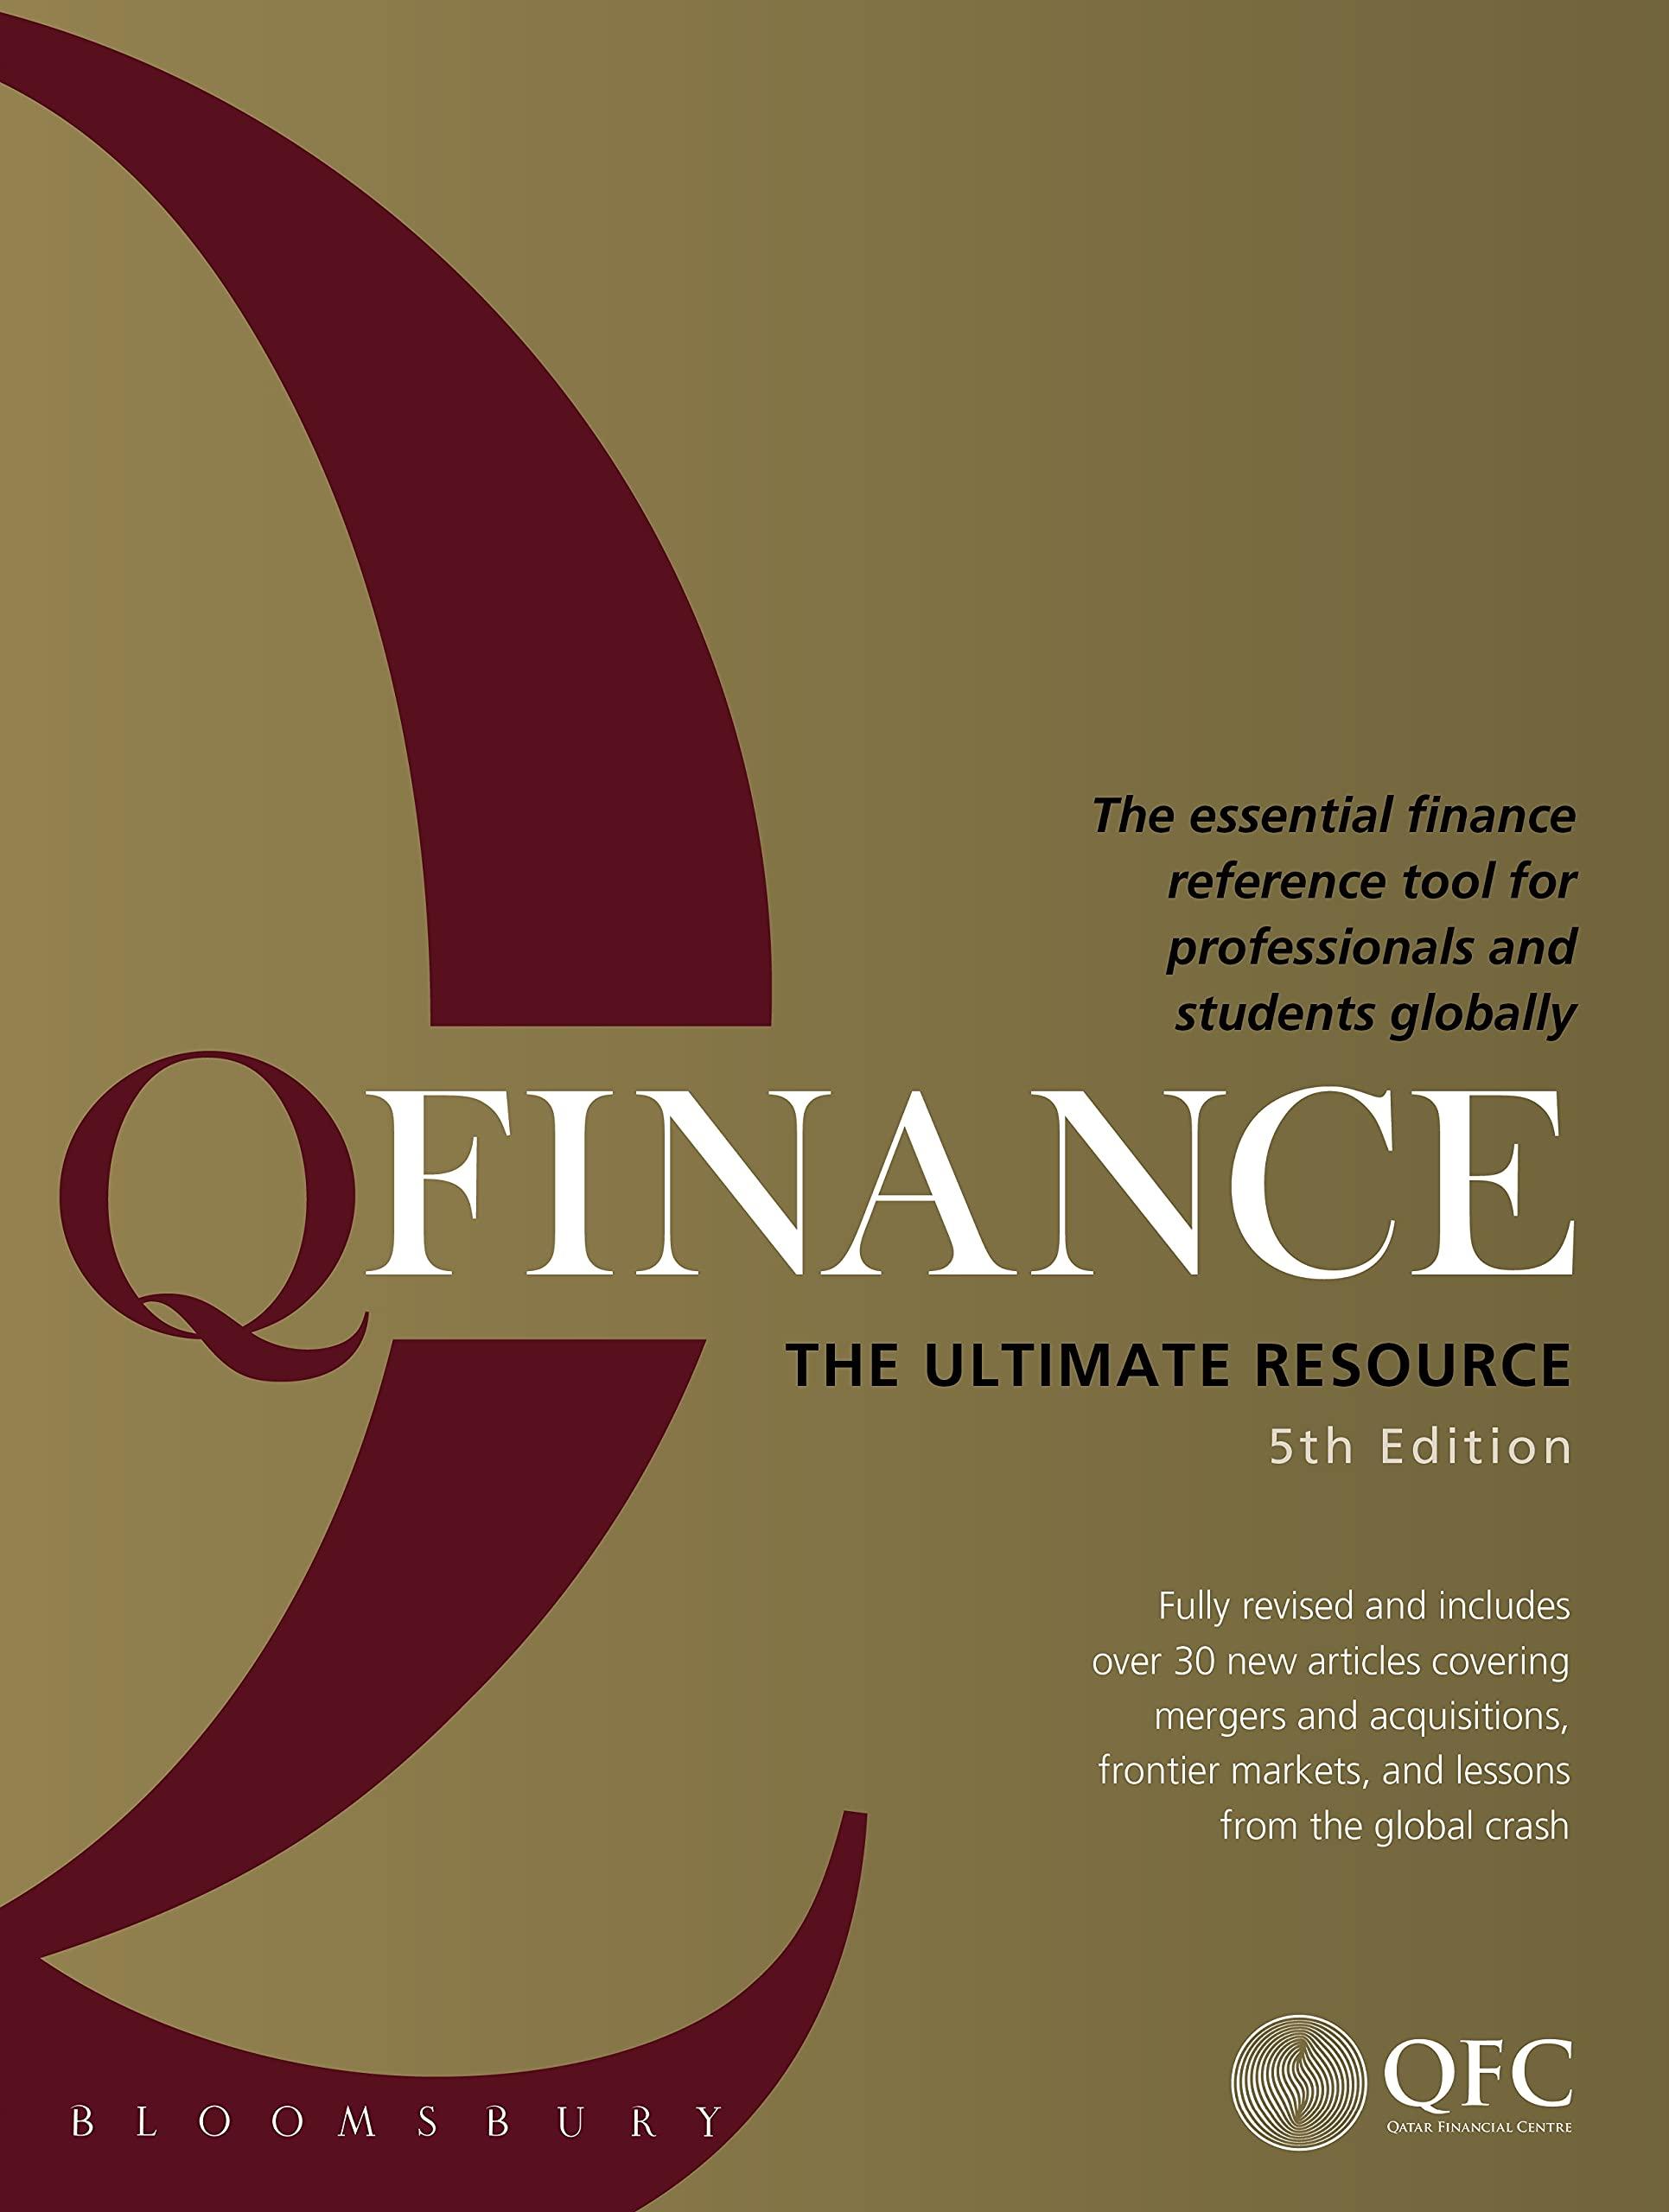 qfinance the ultimate resource 5th edition various various authors 1472914015, 978-1472914019